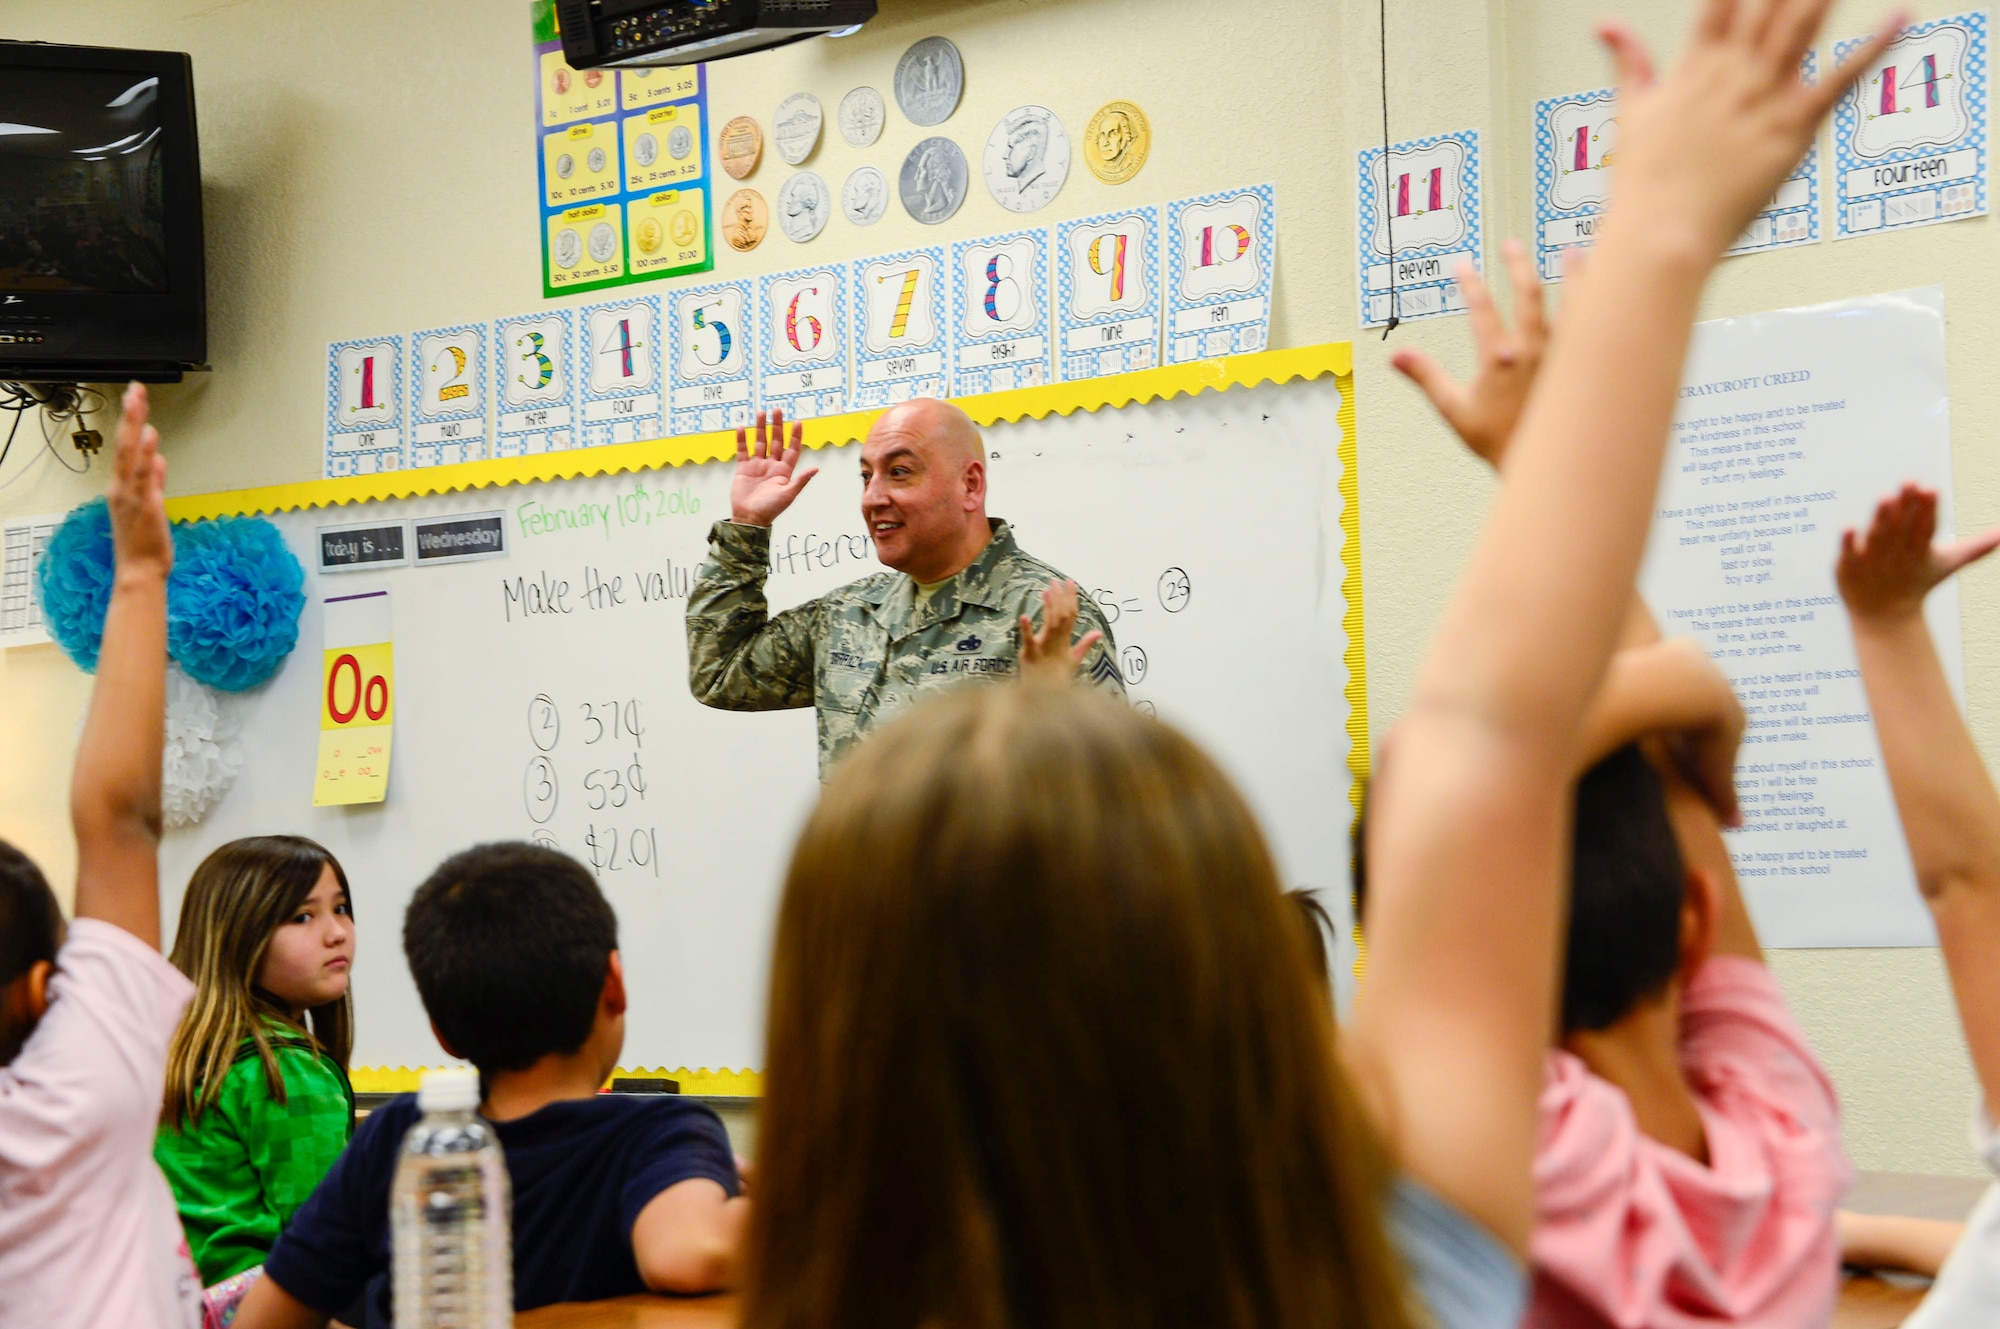 Chief Master Sgt. Jose Barraza, 12th Air Force (Air Forces Southern) Command Chief, visits a second grade class at Craycroft Elementary School, Tucson, Ariz., Feb. 10, 2016, during Love of Reading Week. During his visit, Barraza read to multiple classes and talked with the students about the importance of reading and education.  (U.S. Air Force photo by Tech. Sgt. Heather Redman/Released)